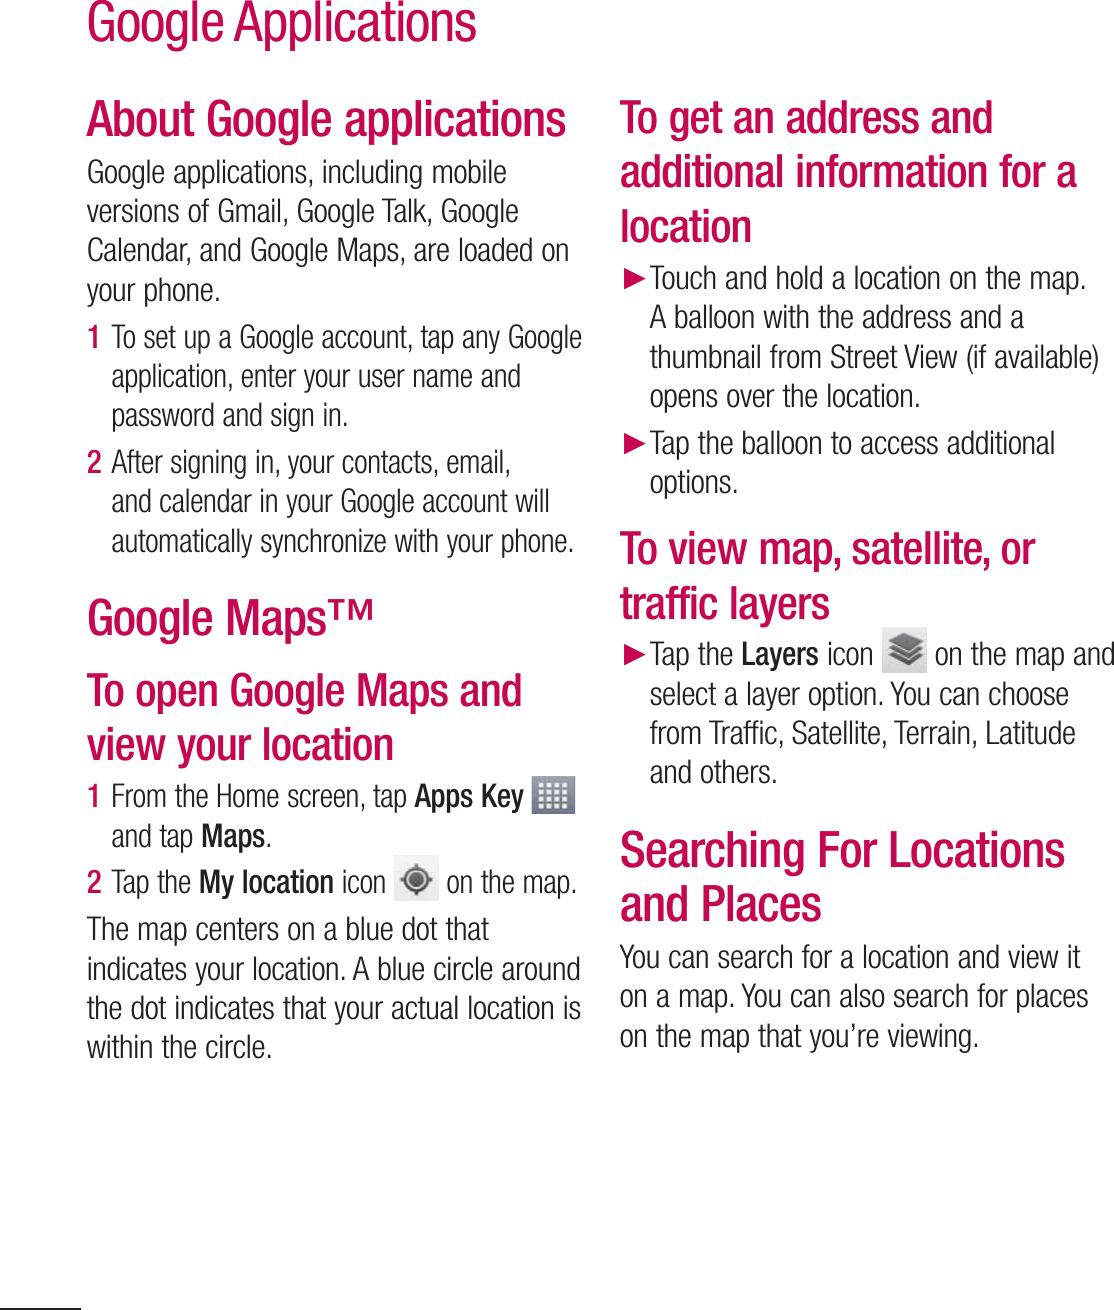 82About Google applicationsGoogle applications, including mobile versions of Gmail, Google Talk, Google Calendar, and Google Maps, are loaded on your phone.1  To set up a Google account, tap any Google application, enter your user name and password and sign in.2  After signing in, your contacts, email, and calendar in your Google account will automatically synchronize with your phone.Google Maps™To open Google Maps and view your location1  From the Home screen, tap Apps Key   and tap Maps. 2  Tap the My location icon   on the map.The map centers on a blue dot that indicates your location. A blue circle around the dot indicates that your actual location is within the circle.To get an address and additional information for a location Touch and hold a location on the map. A balloon with the address and a thumbnail from Street View (if available) opens over the location. Tap the balloon to access additional options.To view map, satellite, or traffic layers Tap the Layers icon   on the map and select a layer option. You can choose from Traffic, Satellite, Terrain, Latitude and others.Searching For Locations and PlacesYou can search for a location and view it on a map. You can also search for places on the map that you’re viewing.Google Applications